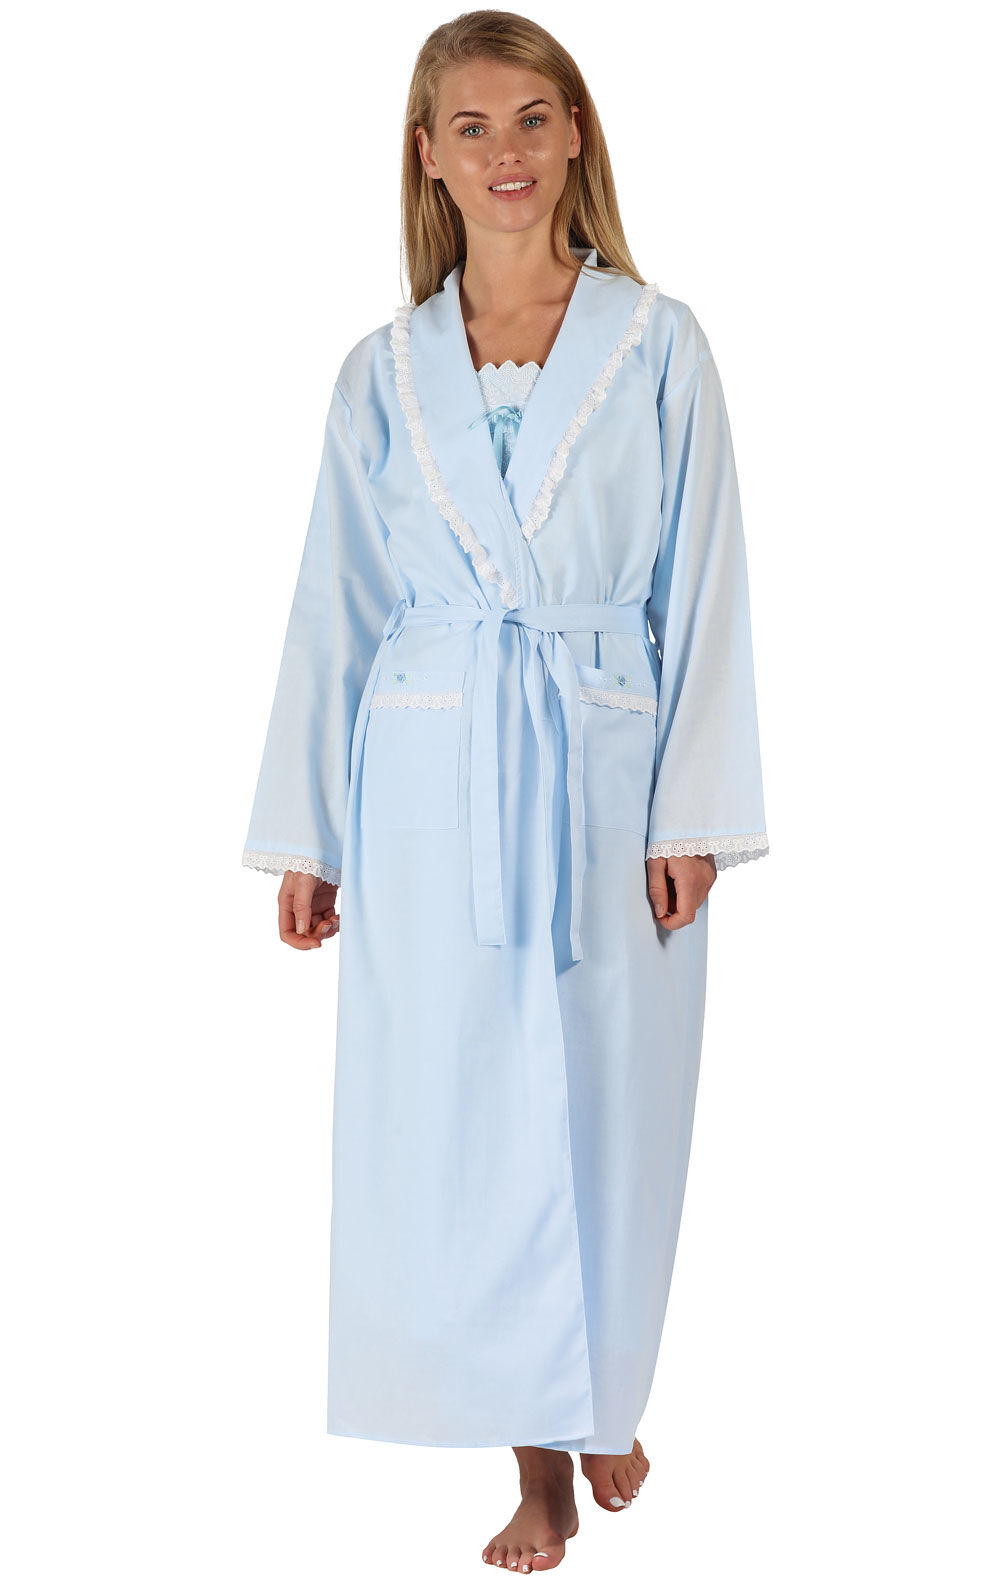 The1forU 100% Cotton Dressing Gown Housecoat Abigail 